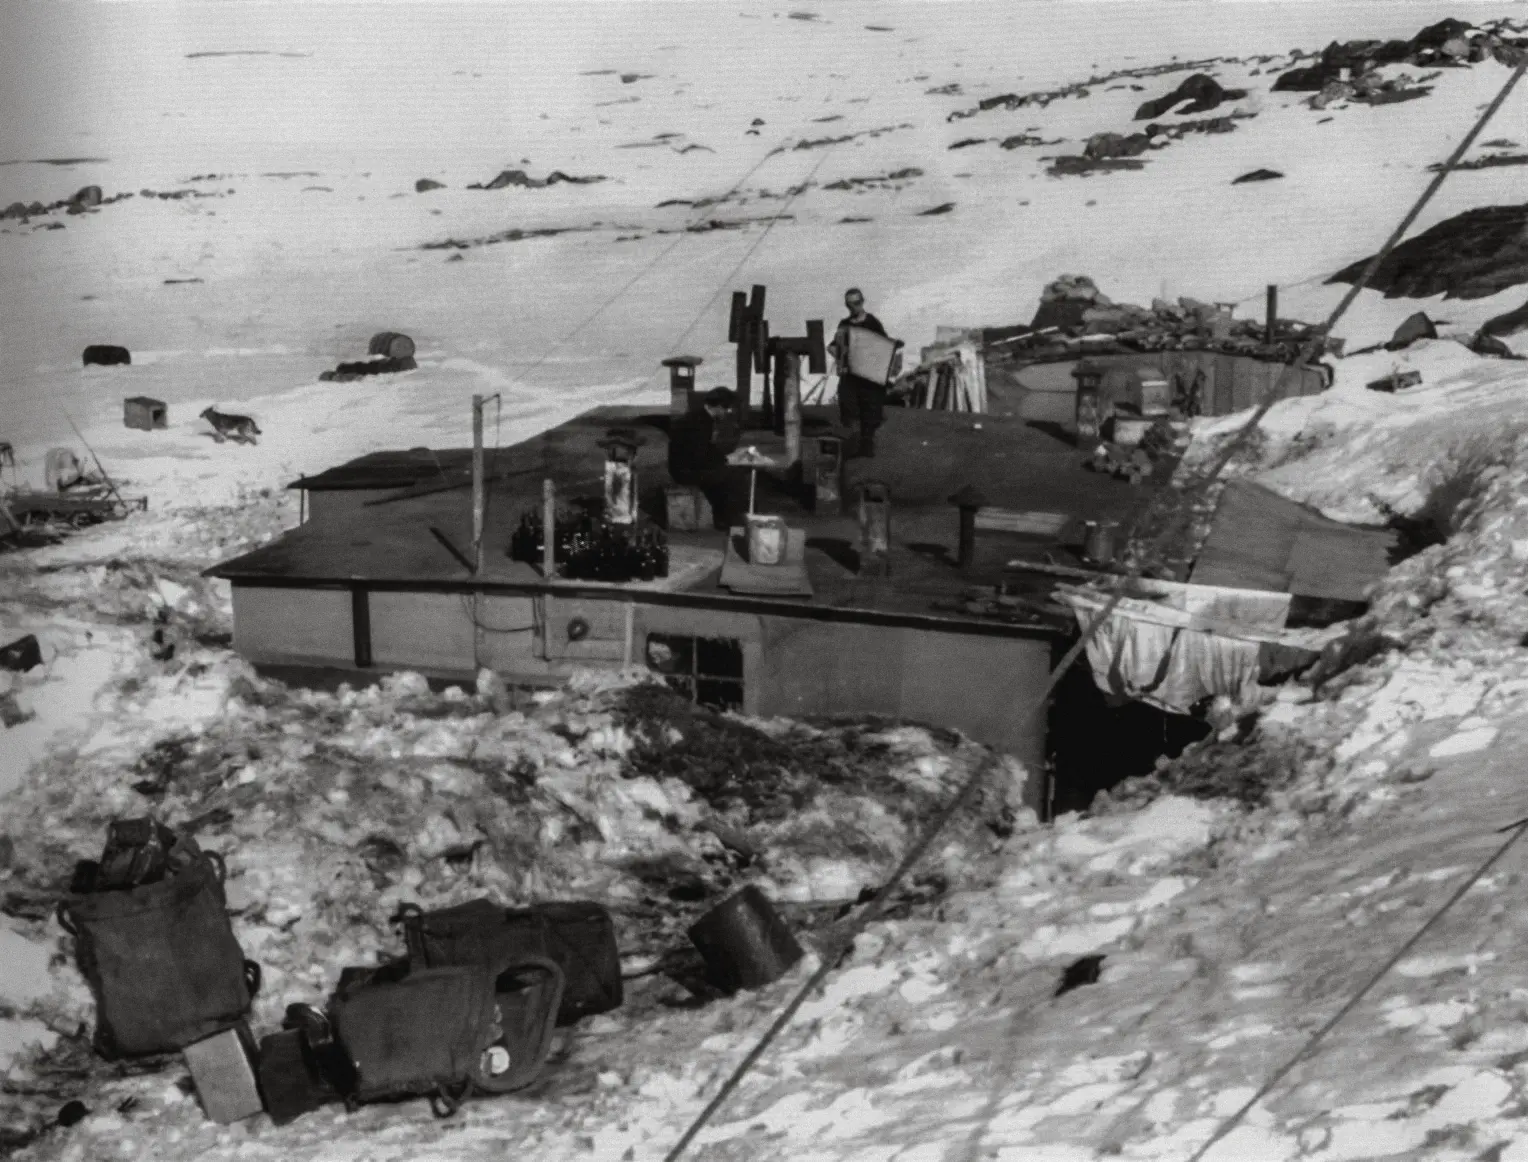 The weather station in June 1945 during the snow melt on the Norwegian island of Nordostland, near Spitsbergen